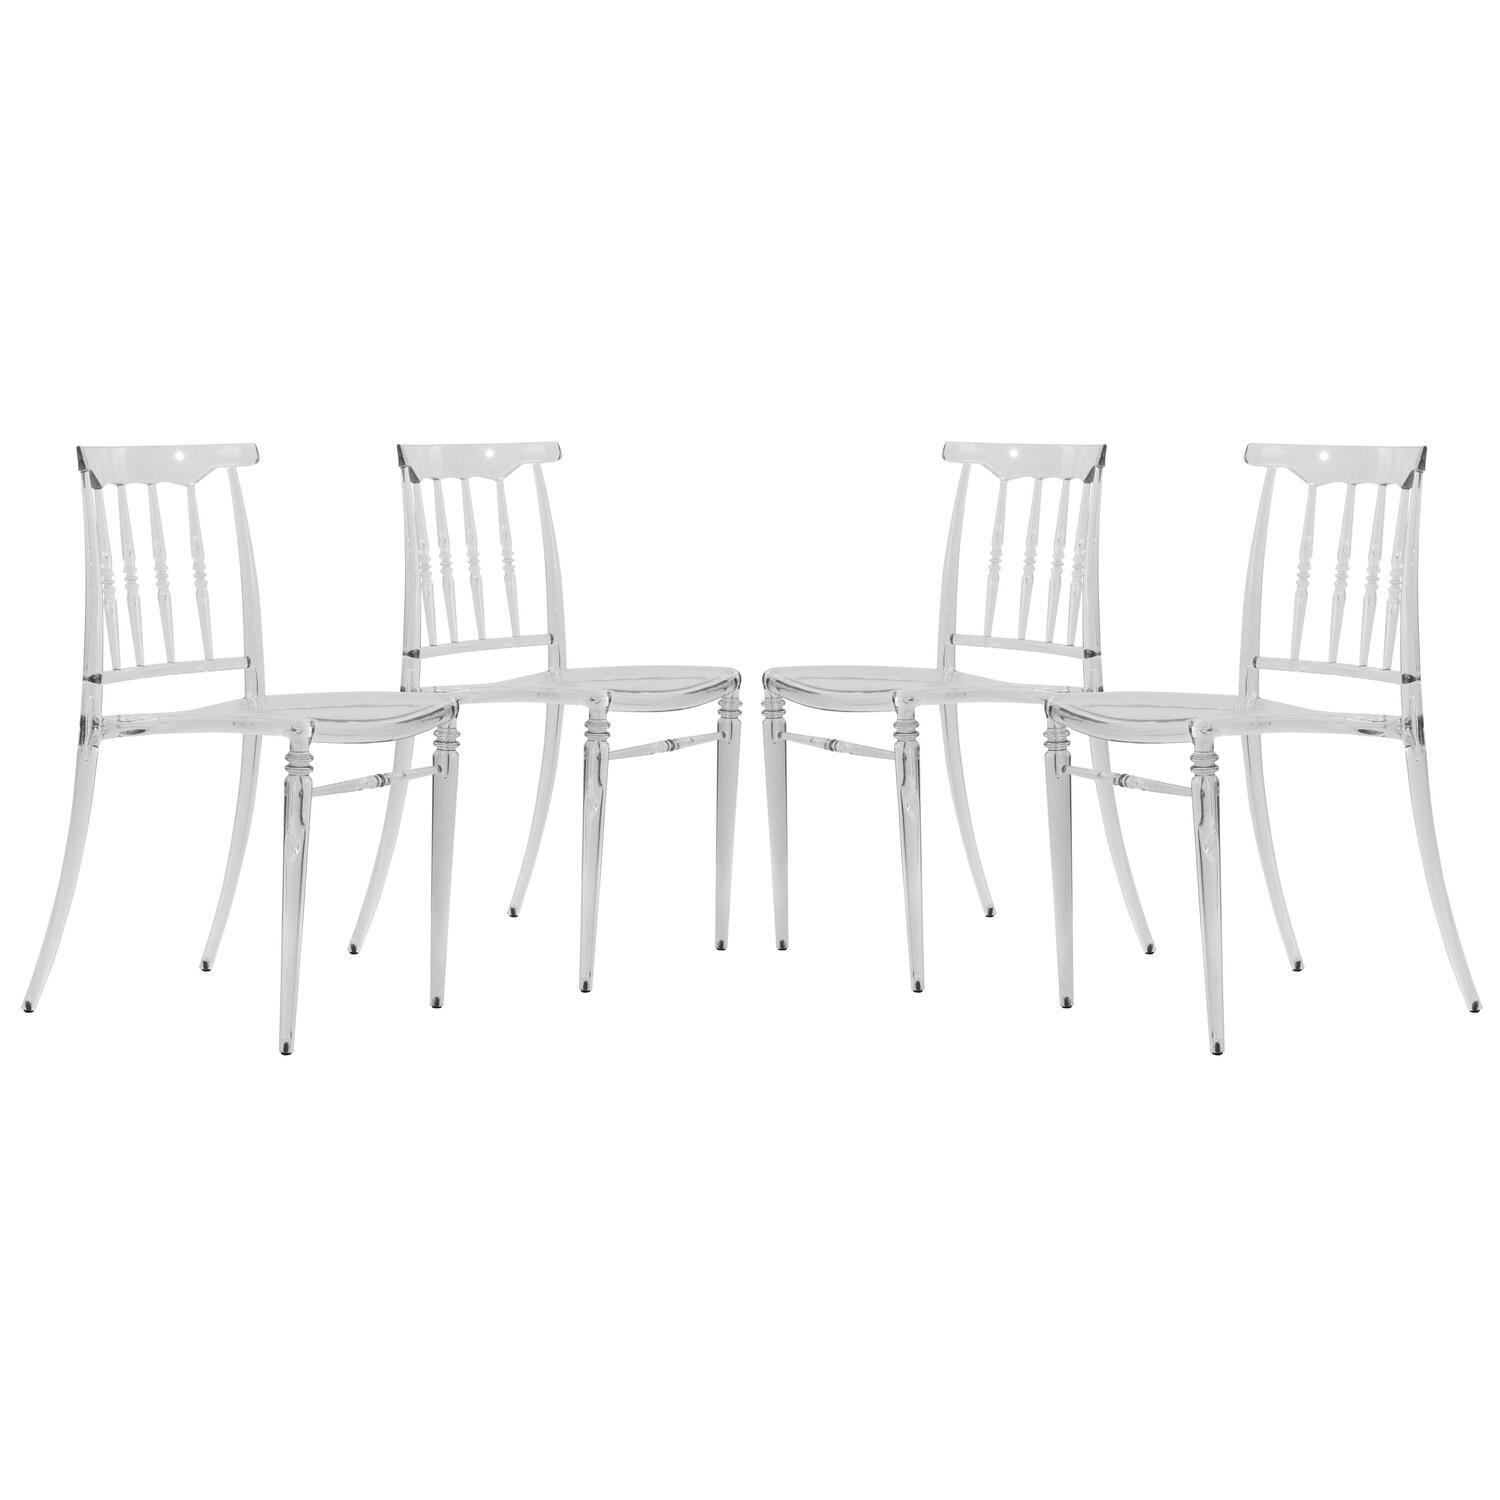 LeisureMod Spindle Transparent Modern Lucite Dining Chair - Set of 4 - image 1 of 10